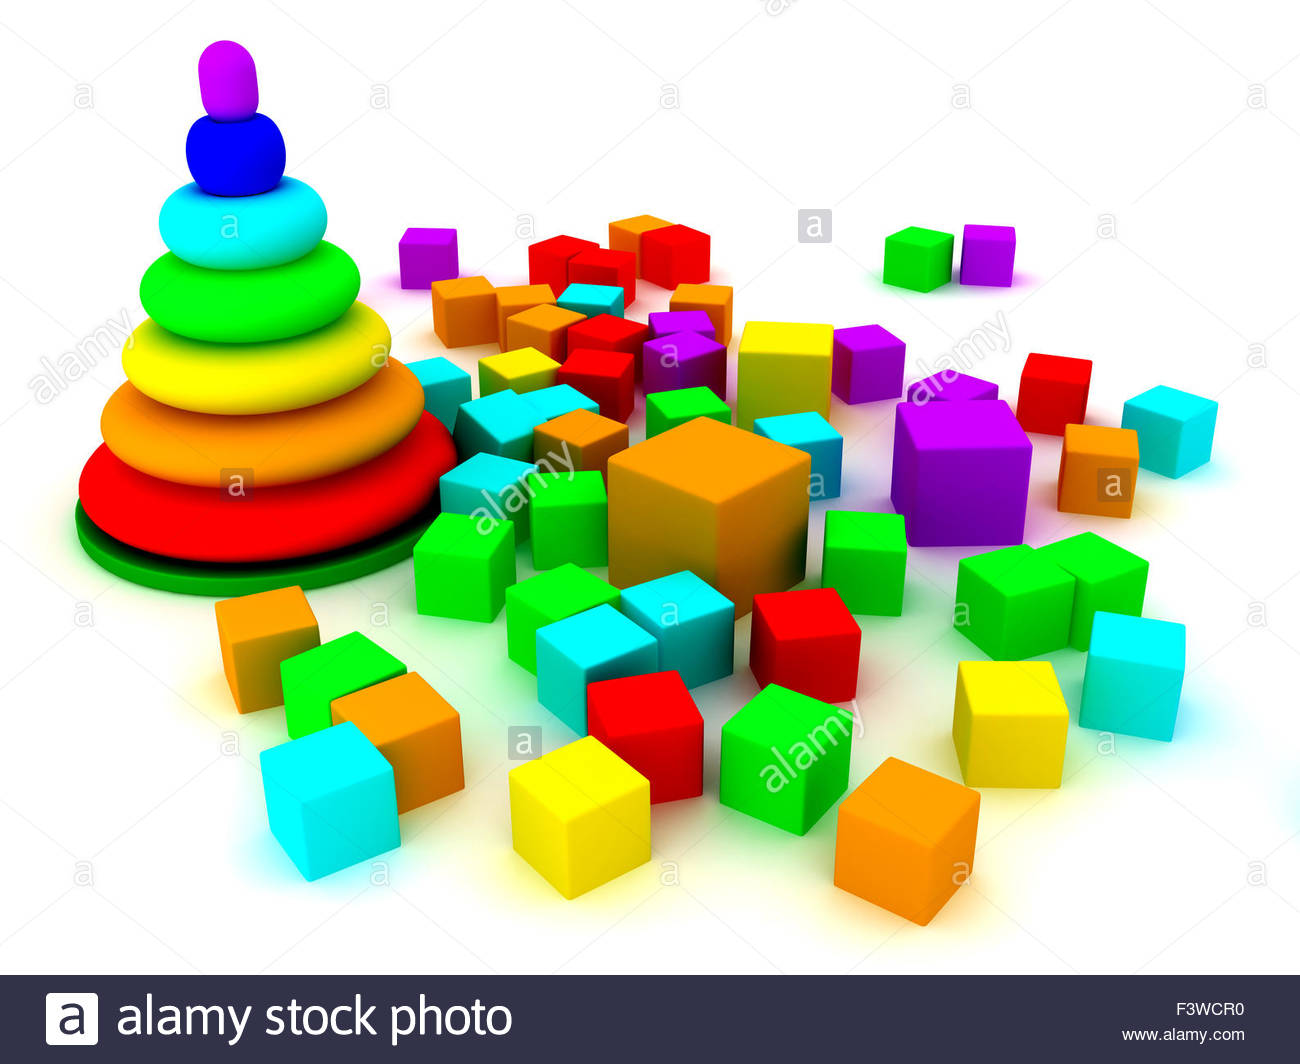 Playtime Background Cut Out Stock Image Pictures